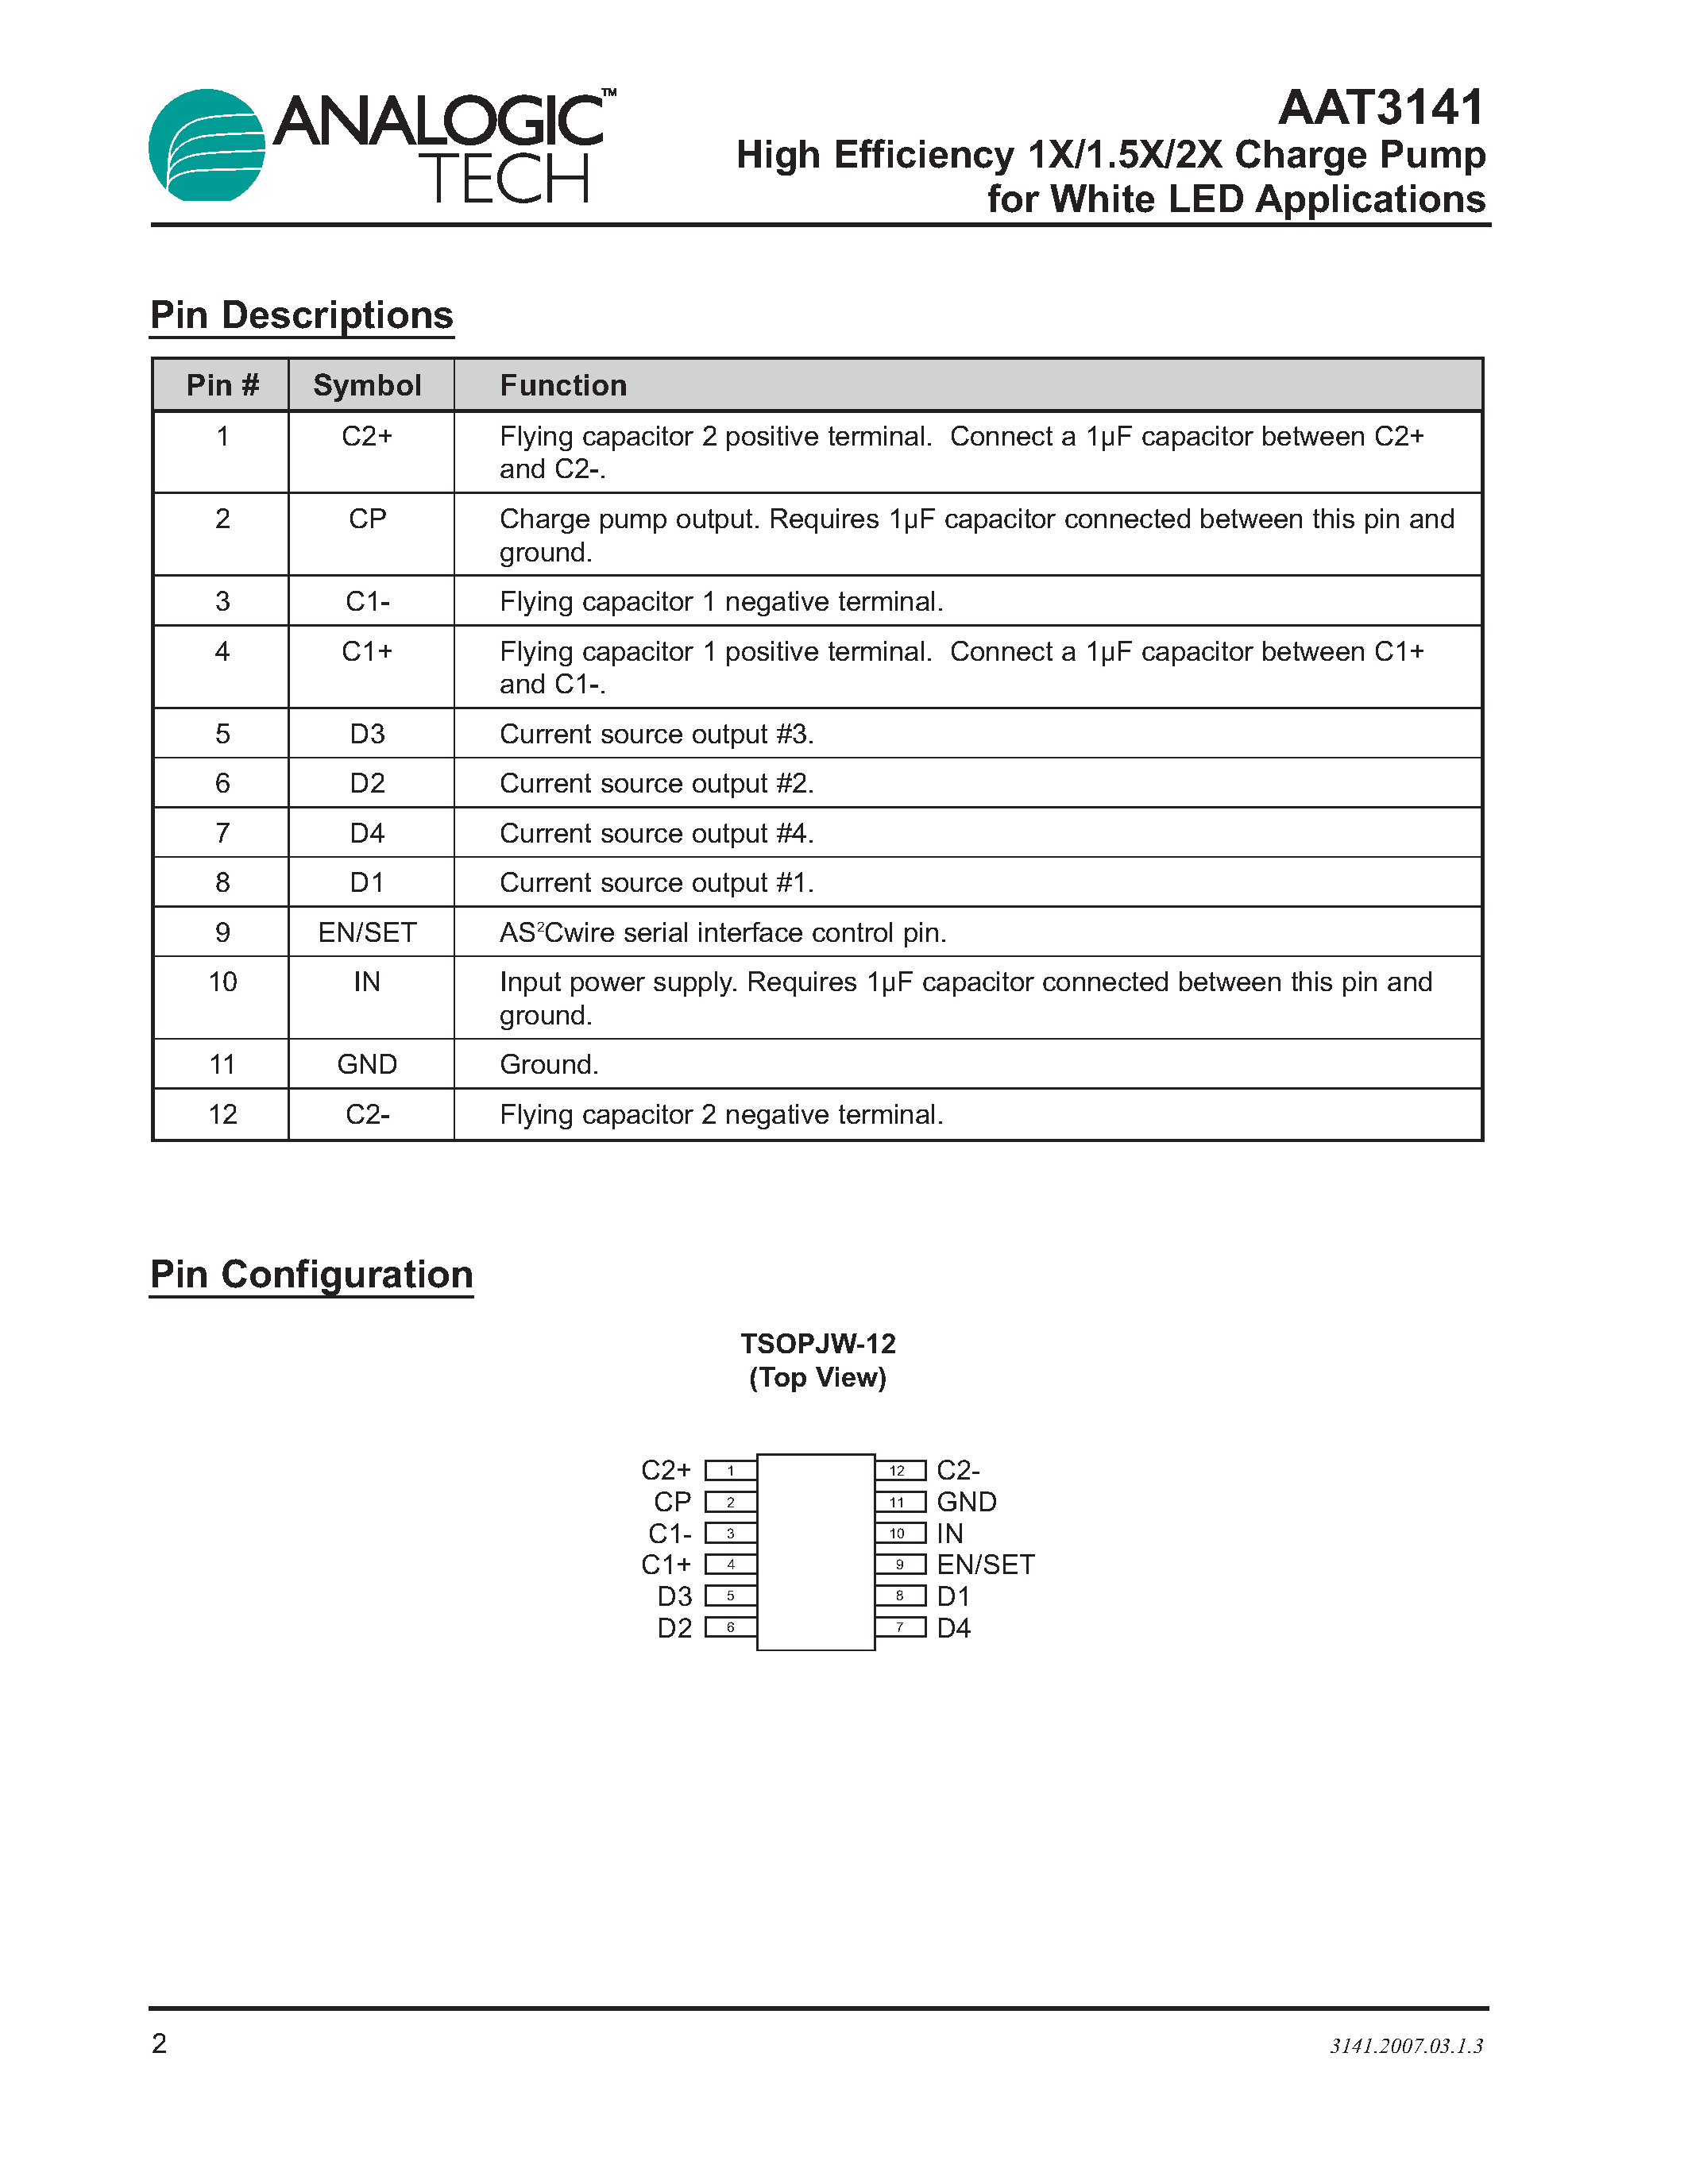 Datasheet AAT3141 - High Efficiency 1X/1.5X/2X Charge Pump page 2